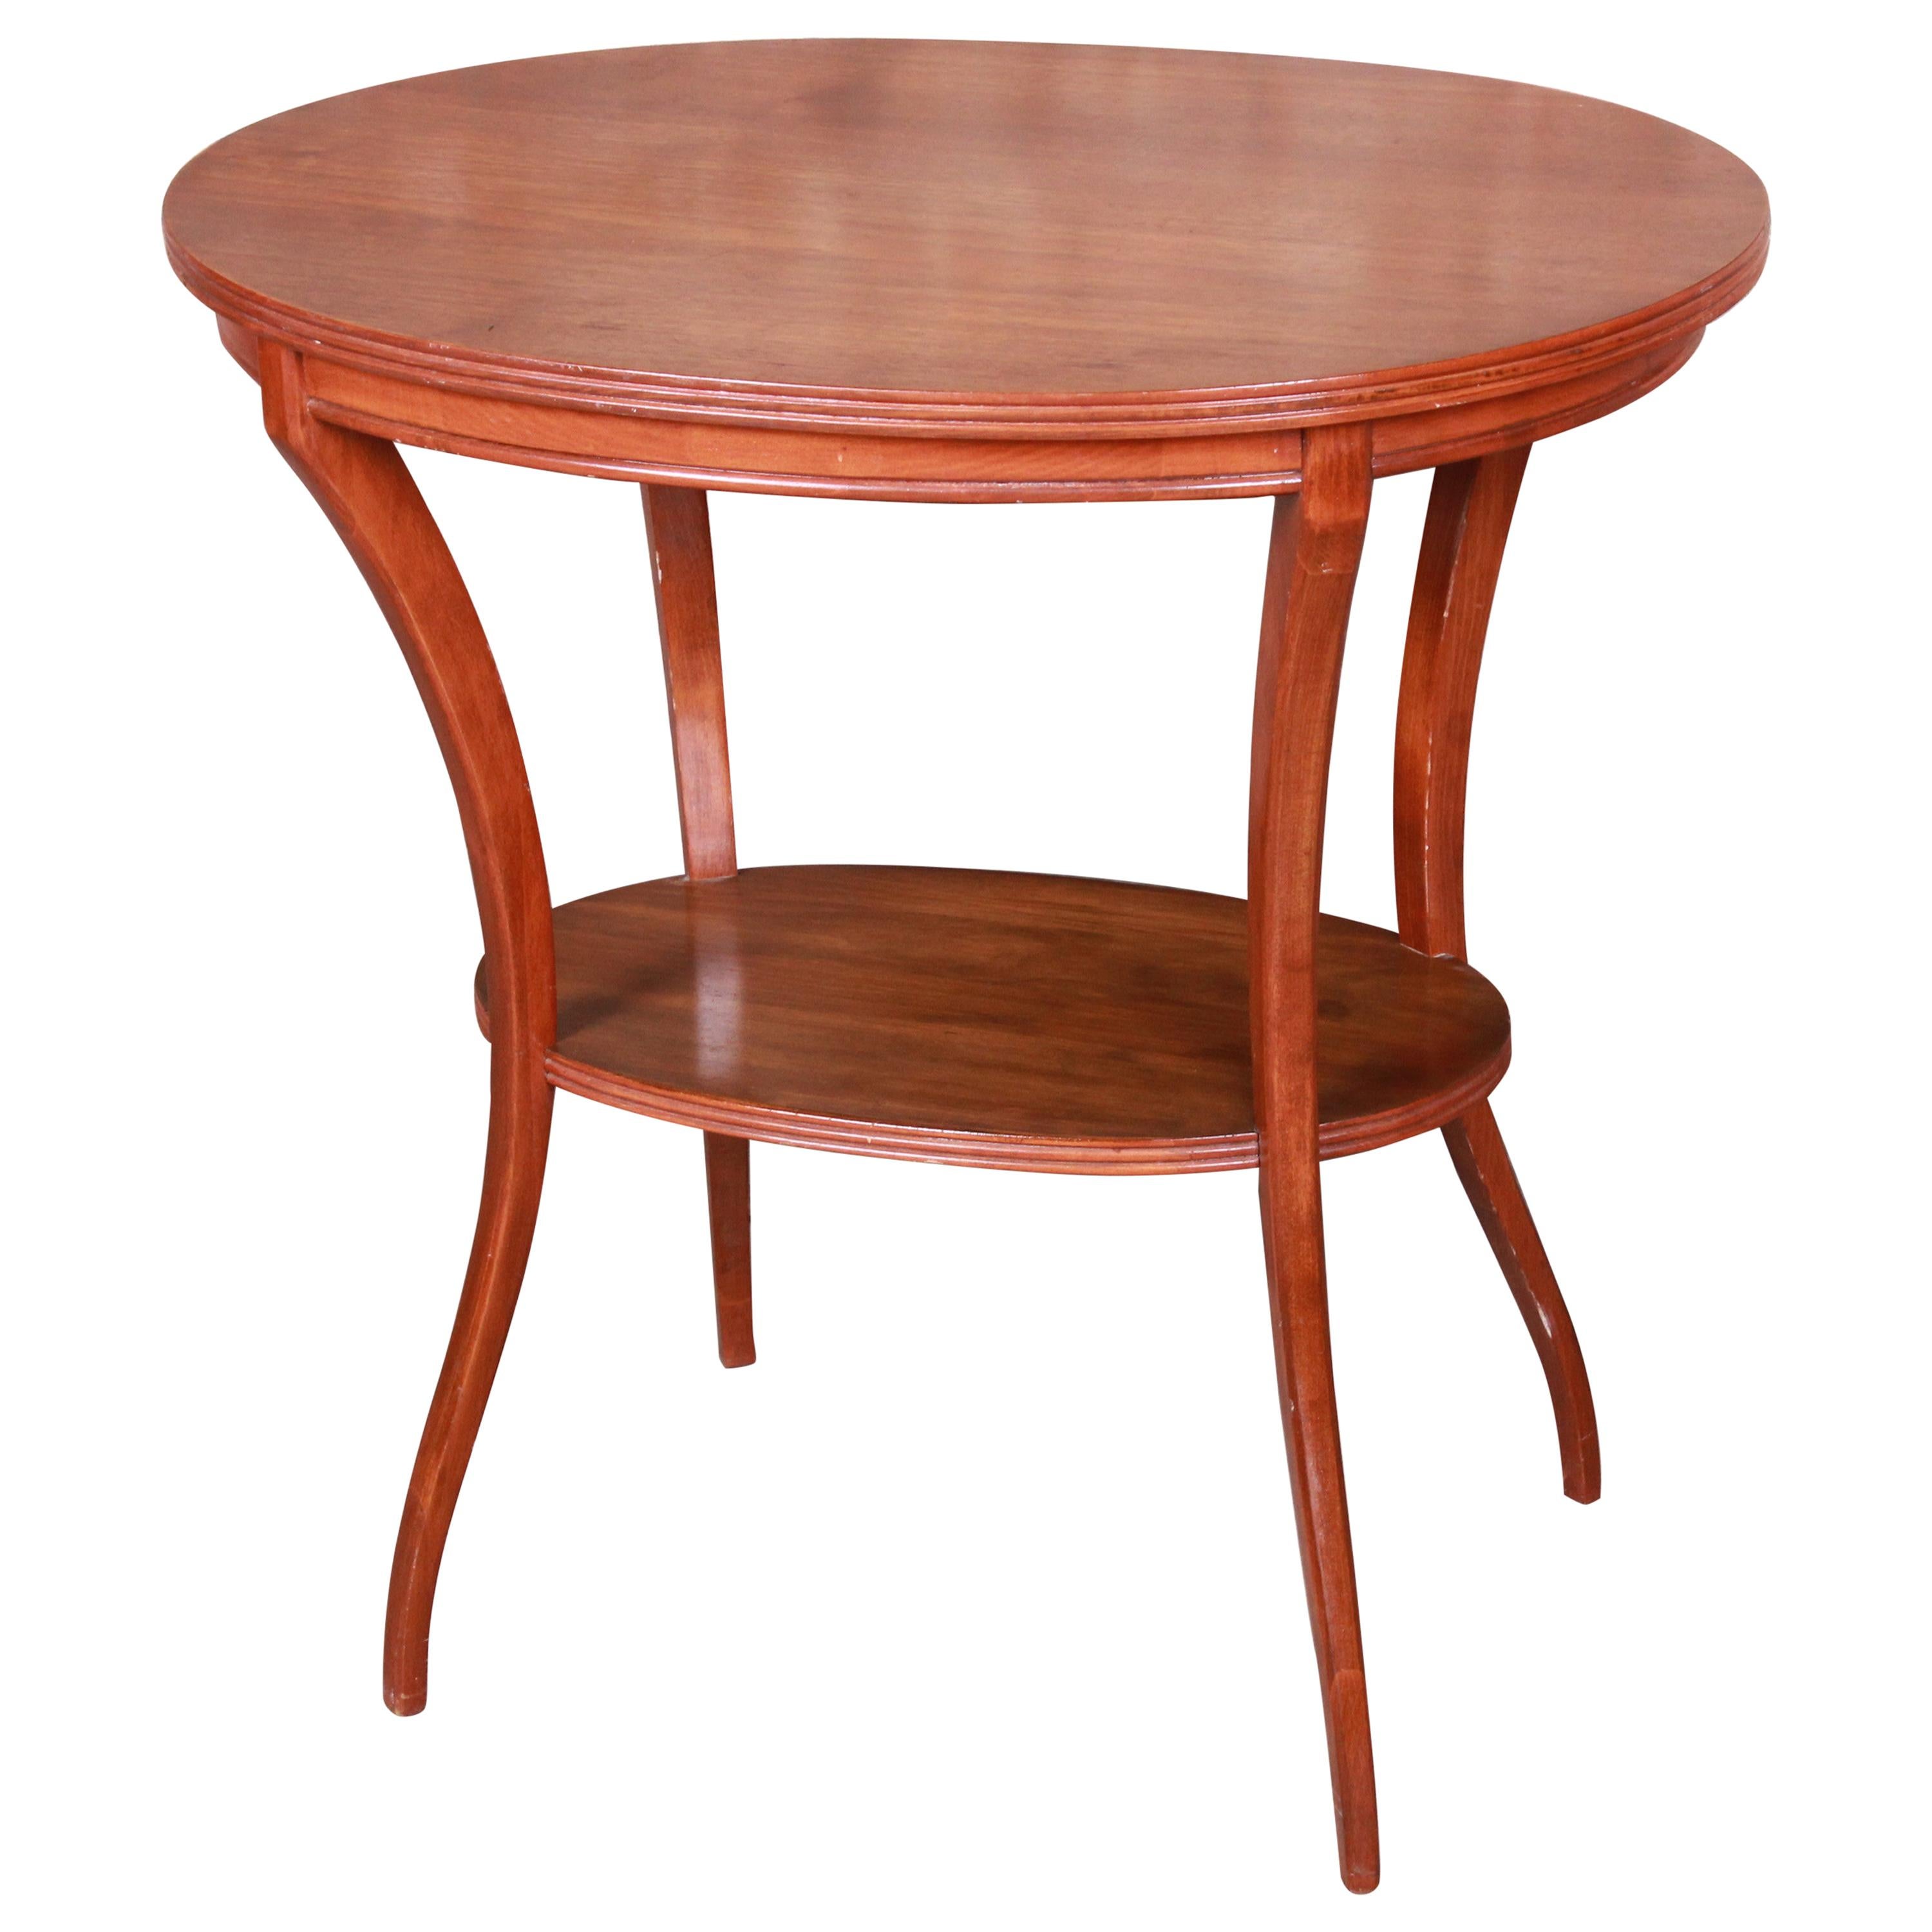 Vintage Mahogany Swag Leg Two-Tier Occasional Side Table